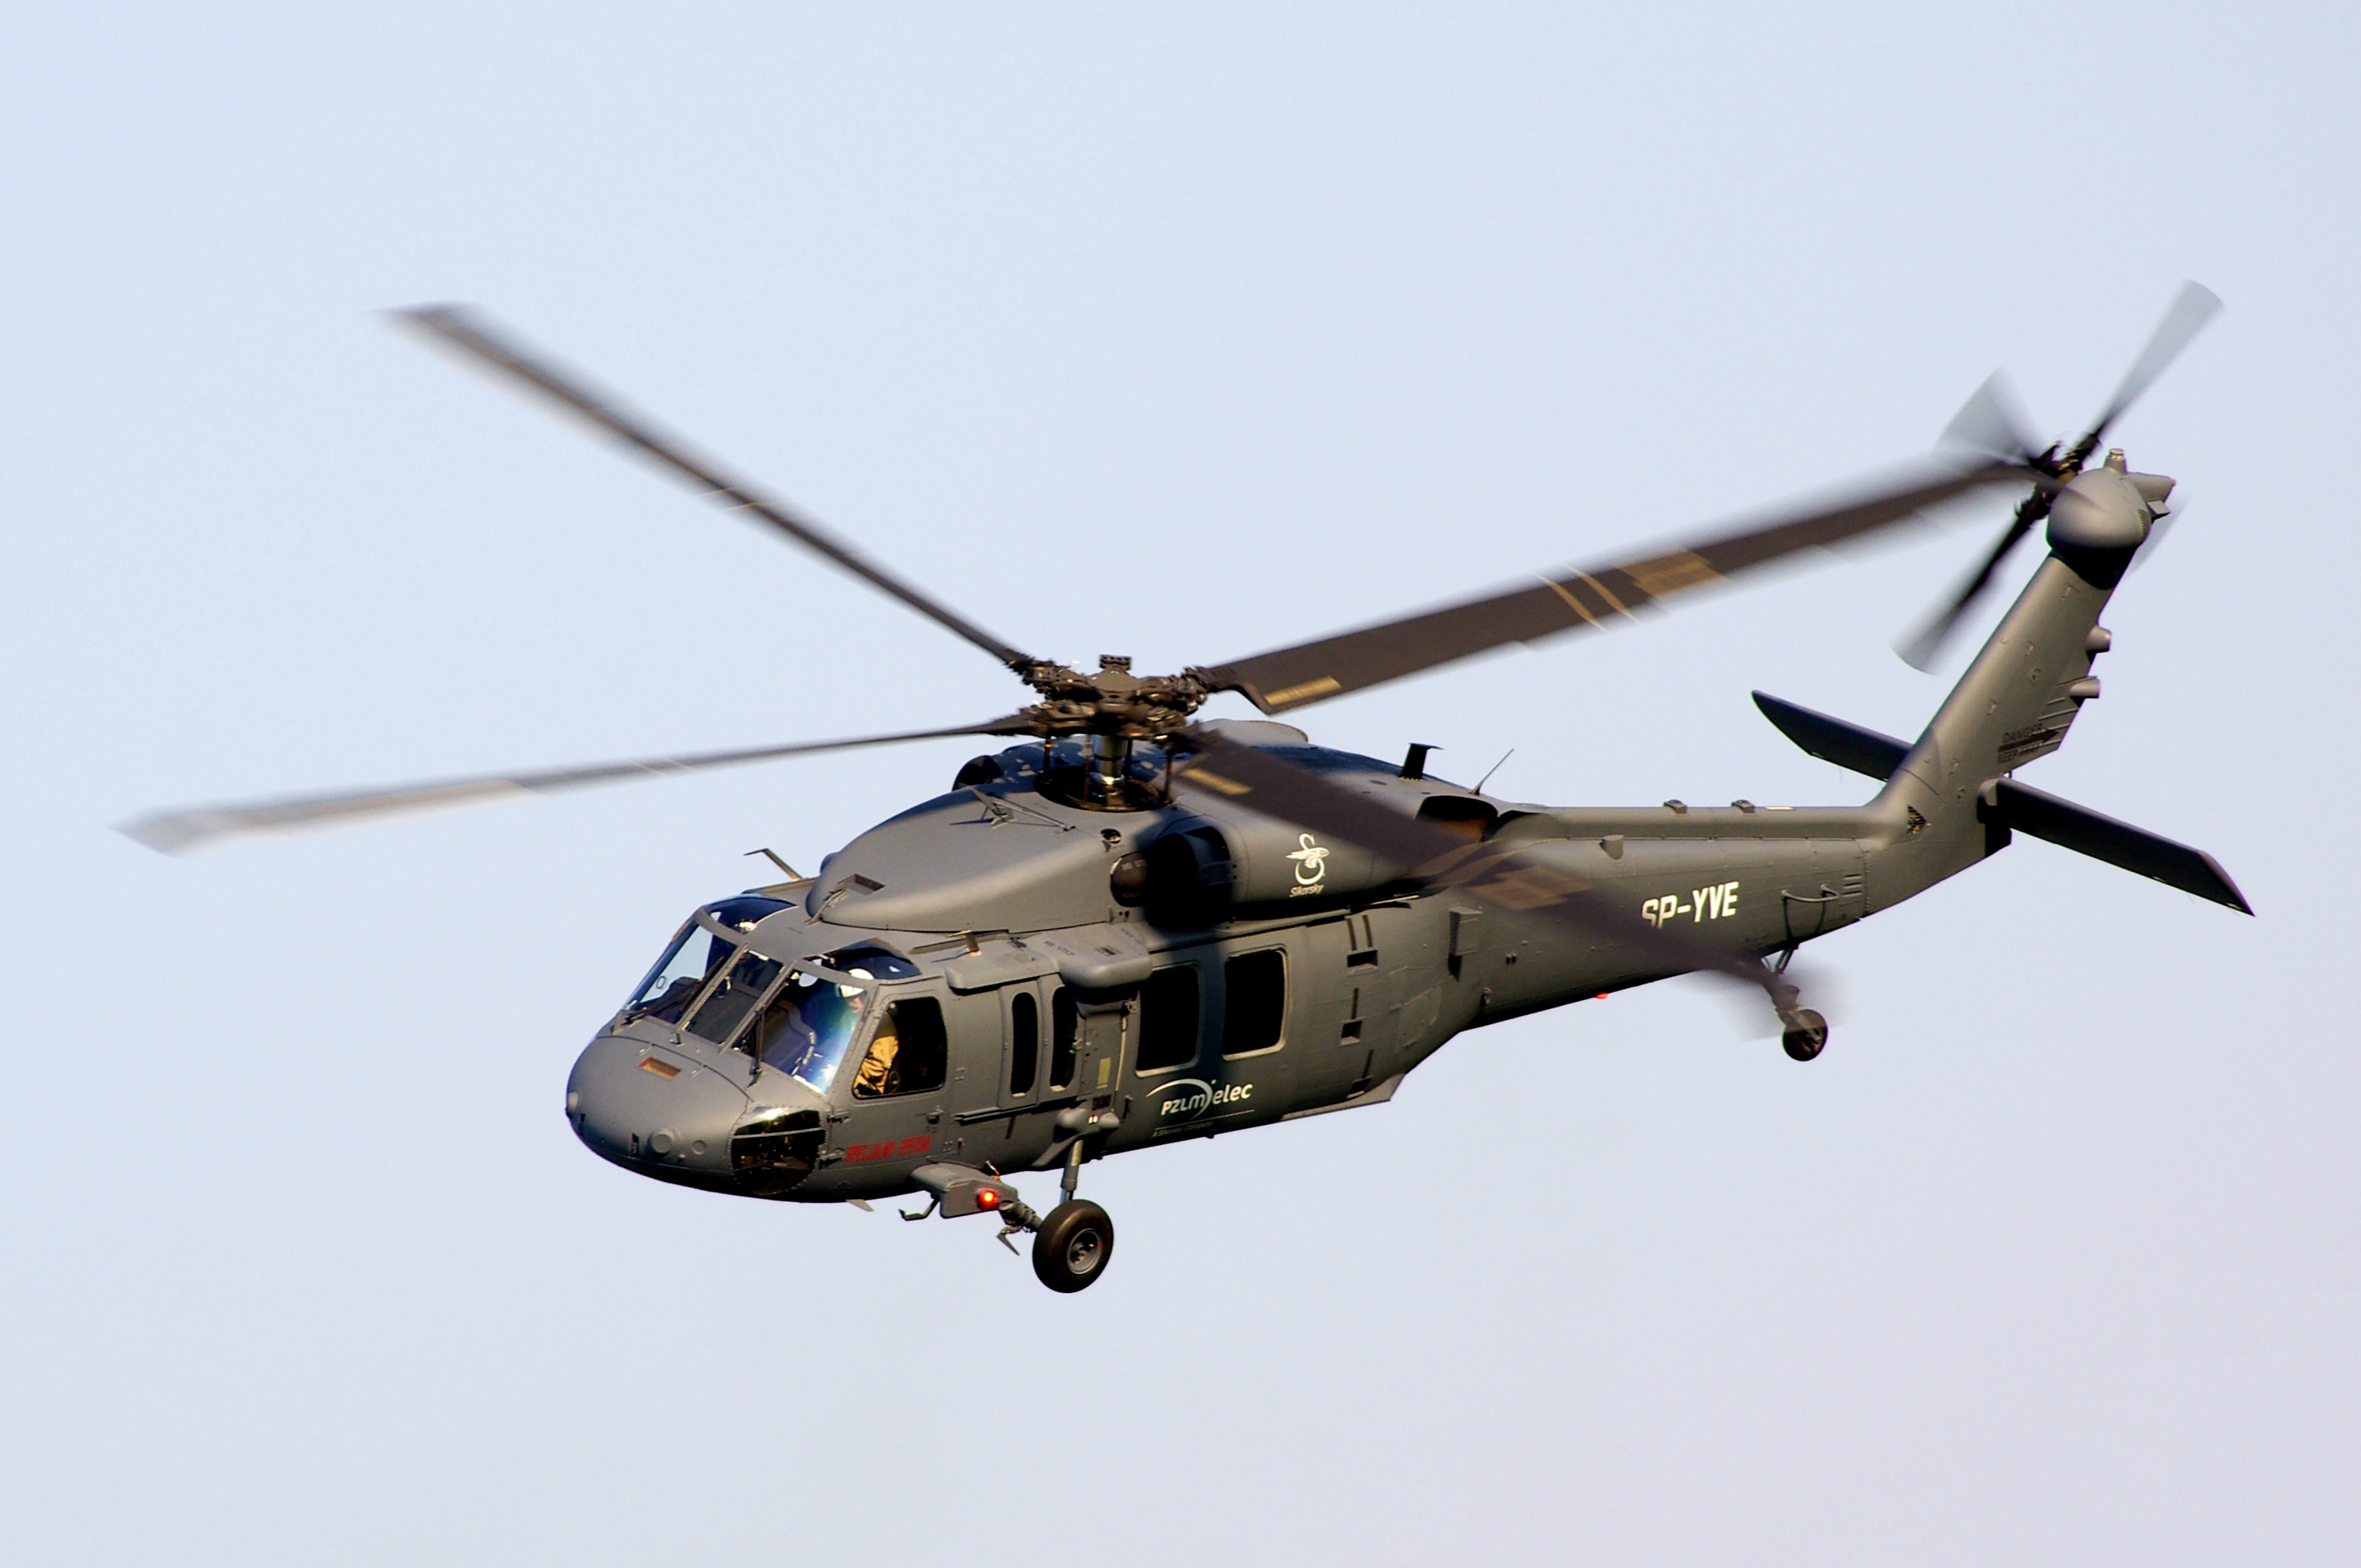 Albania has received two U.S. UH-60 Black Hawk helicopters into service